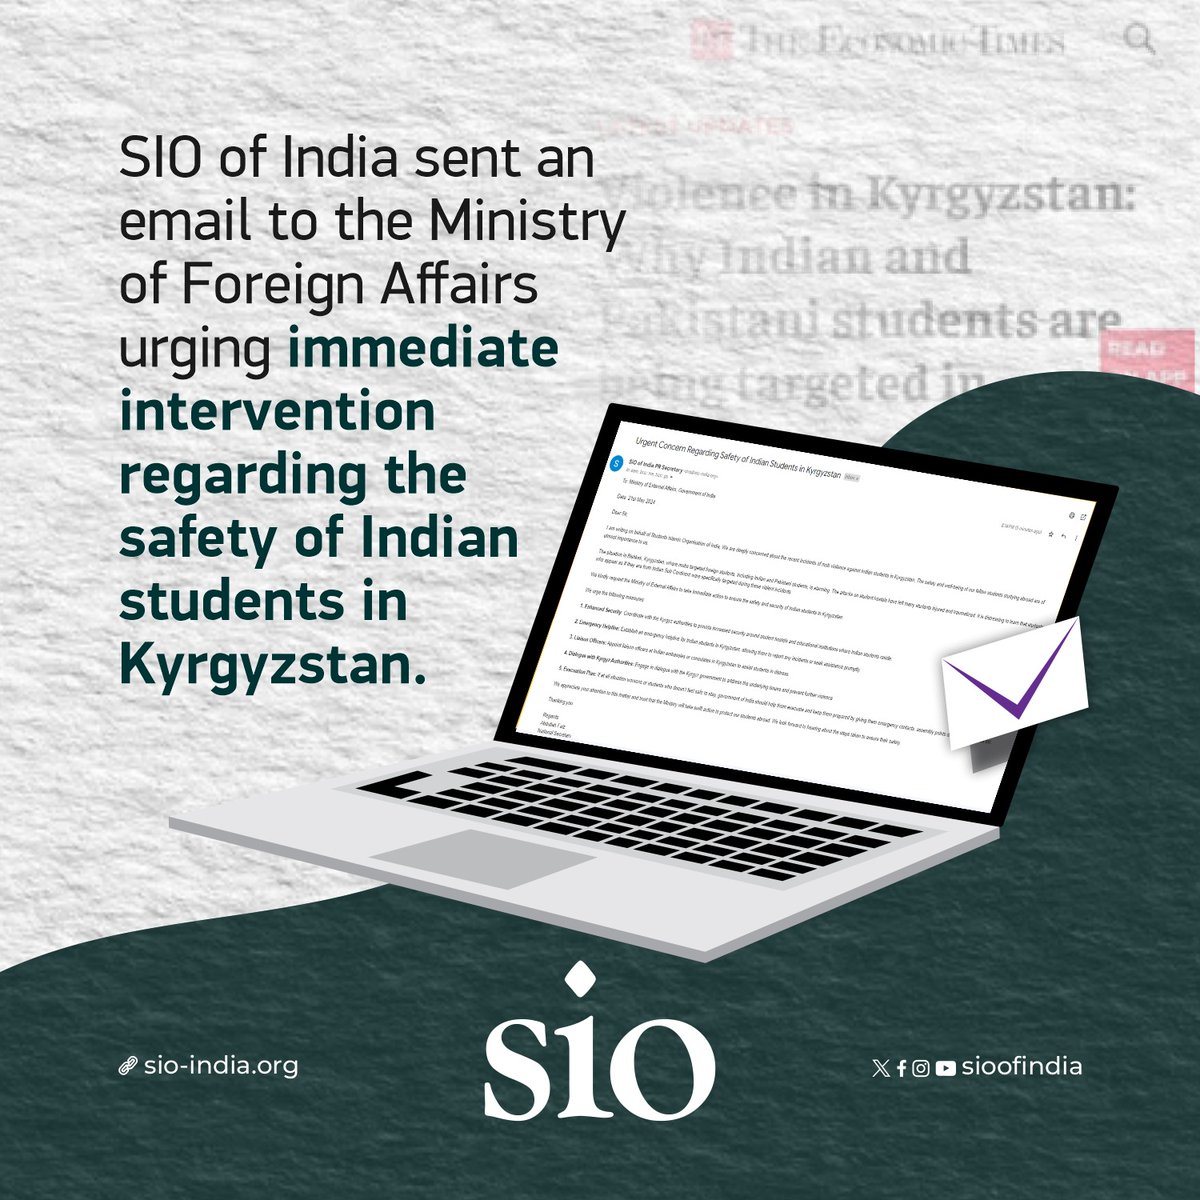 SIO of India sent an email to the Ministry of Foreign Affairs urging immediate intervention regarding the safety of Indian students in Kyrgyzstan.

#Kyrgyzstan